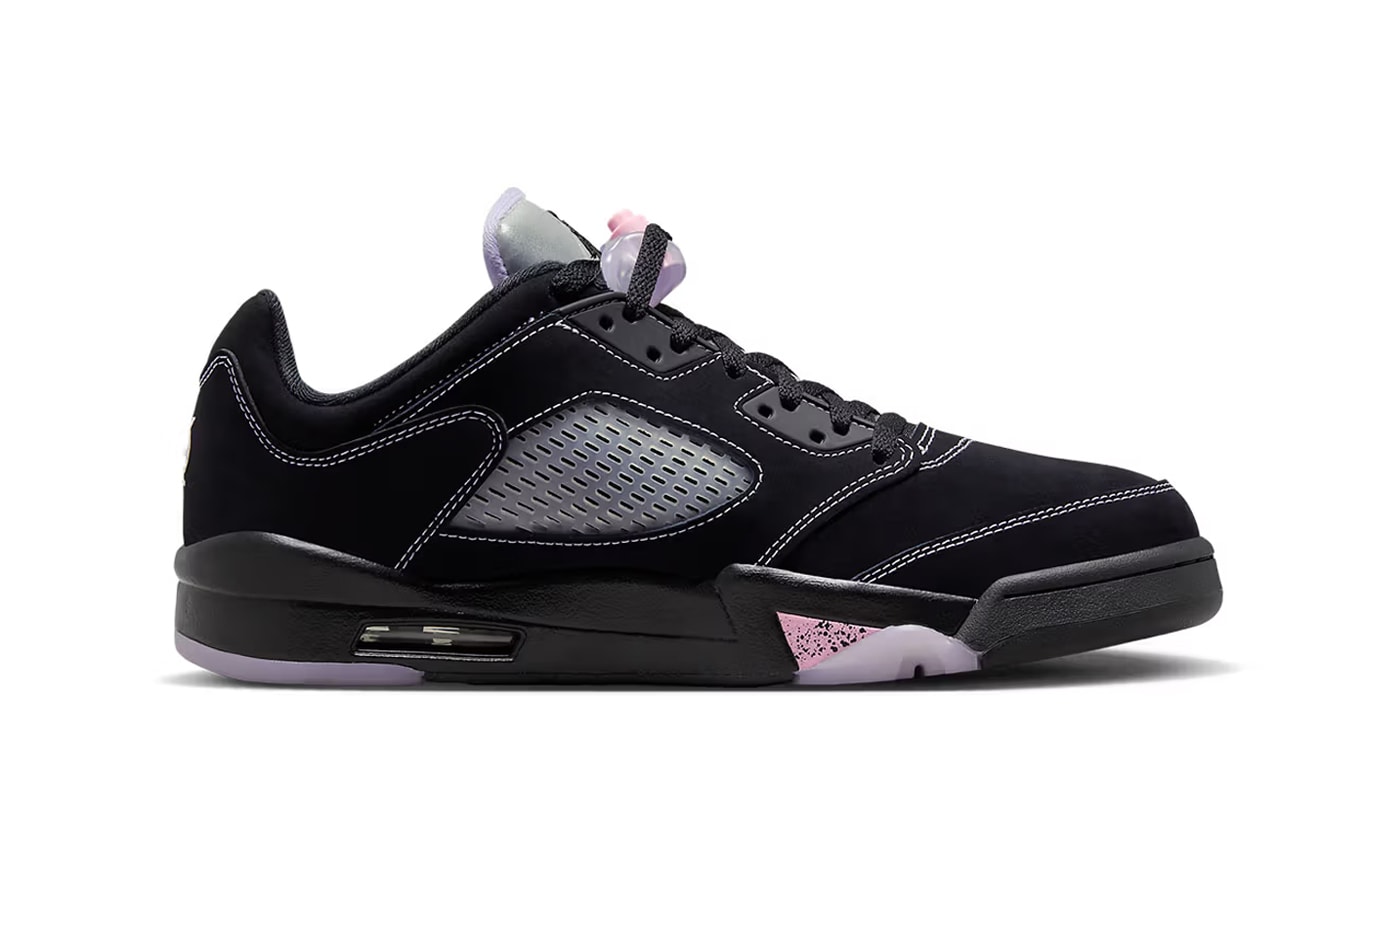 air jordan 5 low black pink release date info store list buying guide photos price dx4355 015